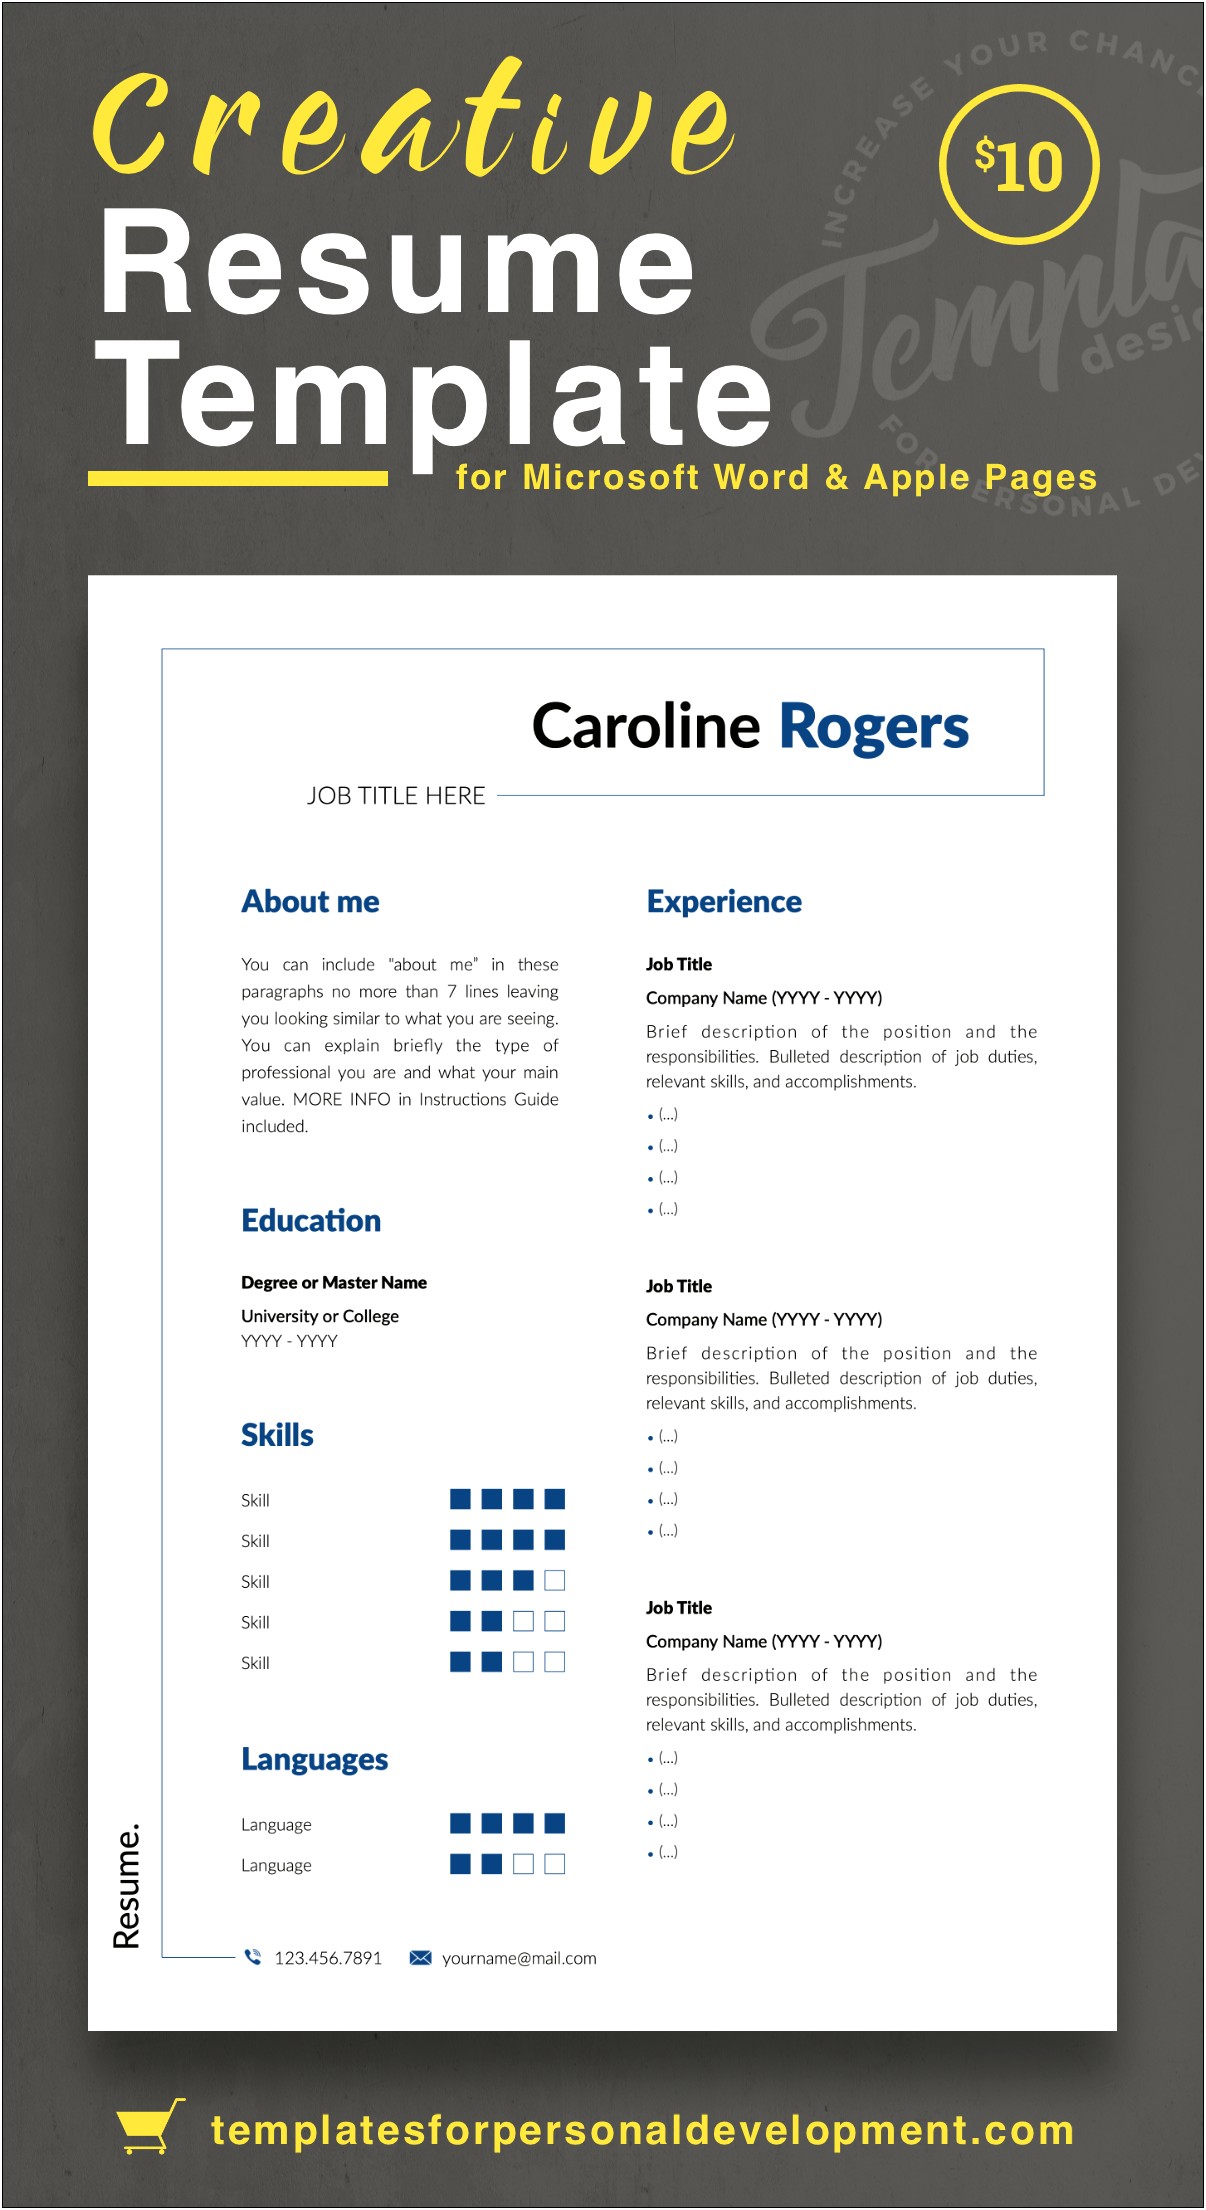 Best Resume And Cover Letter Sites